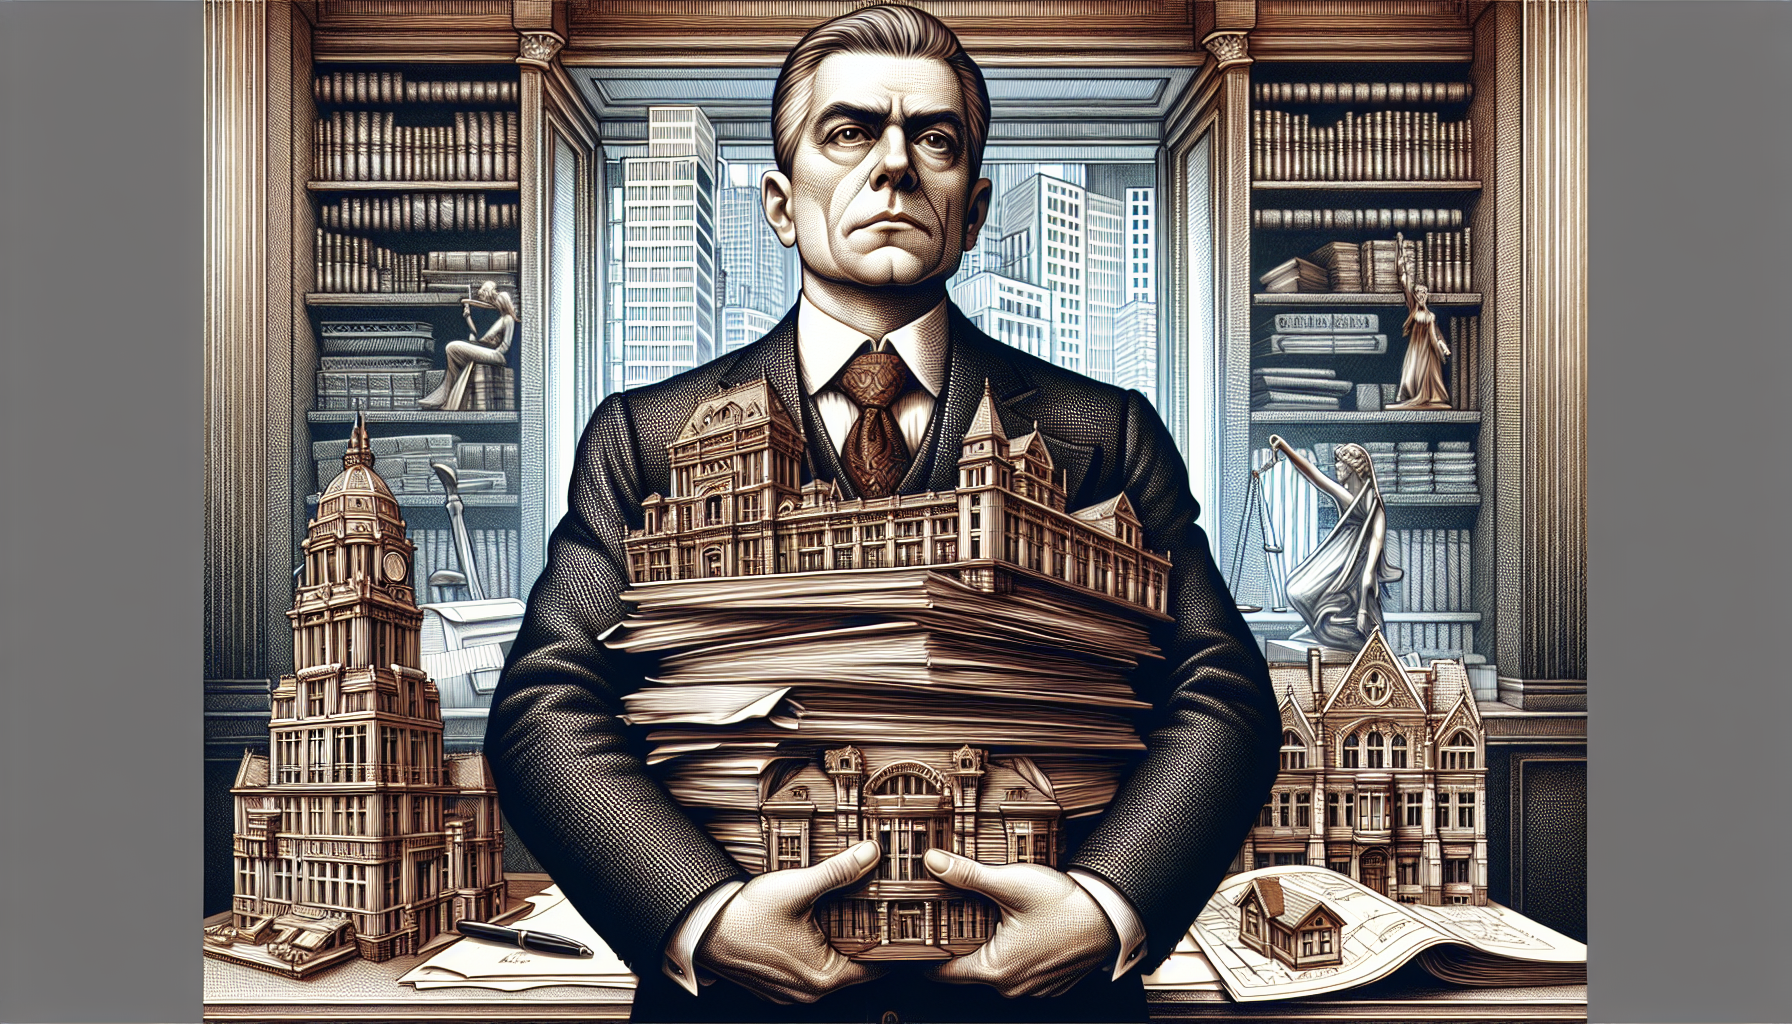 Illustration of a lawyer with legal documents